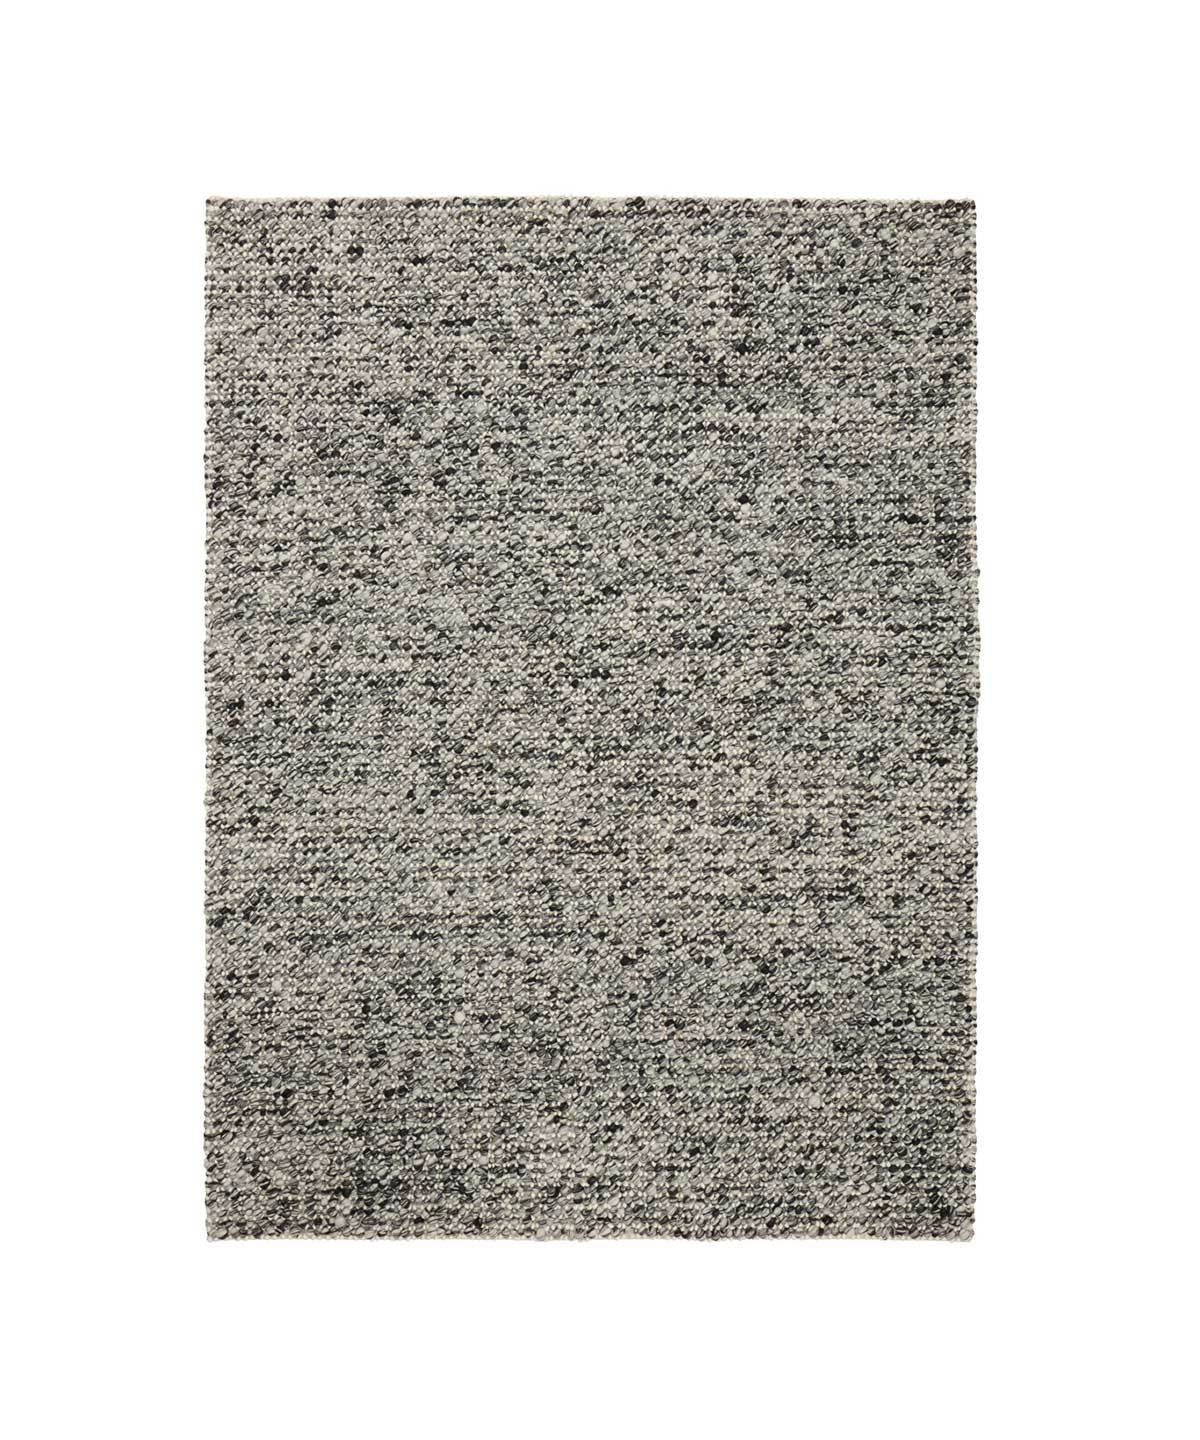 Sigri Rug in Charcoal